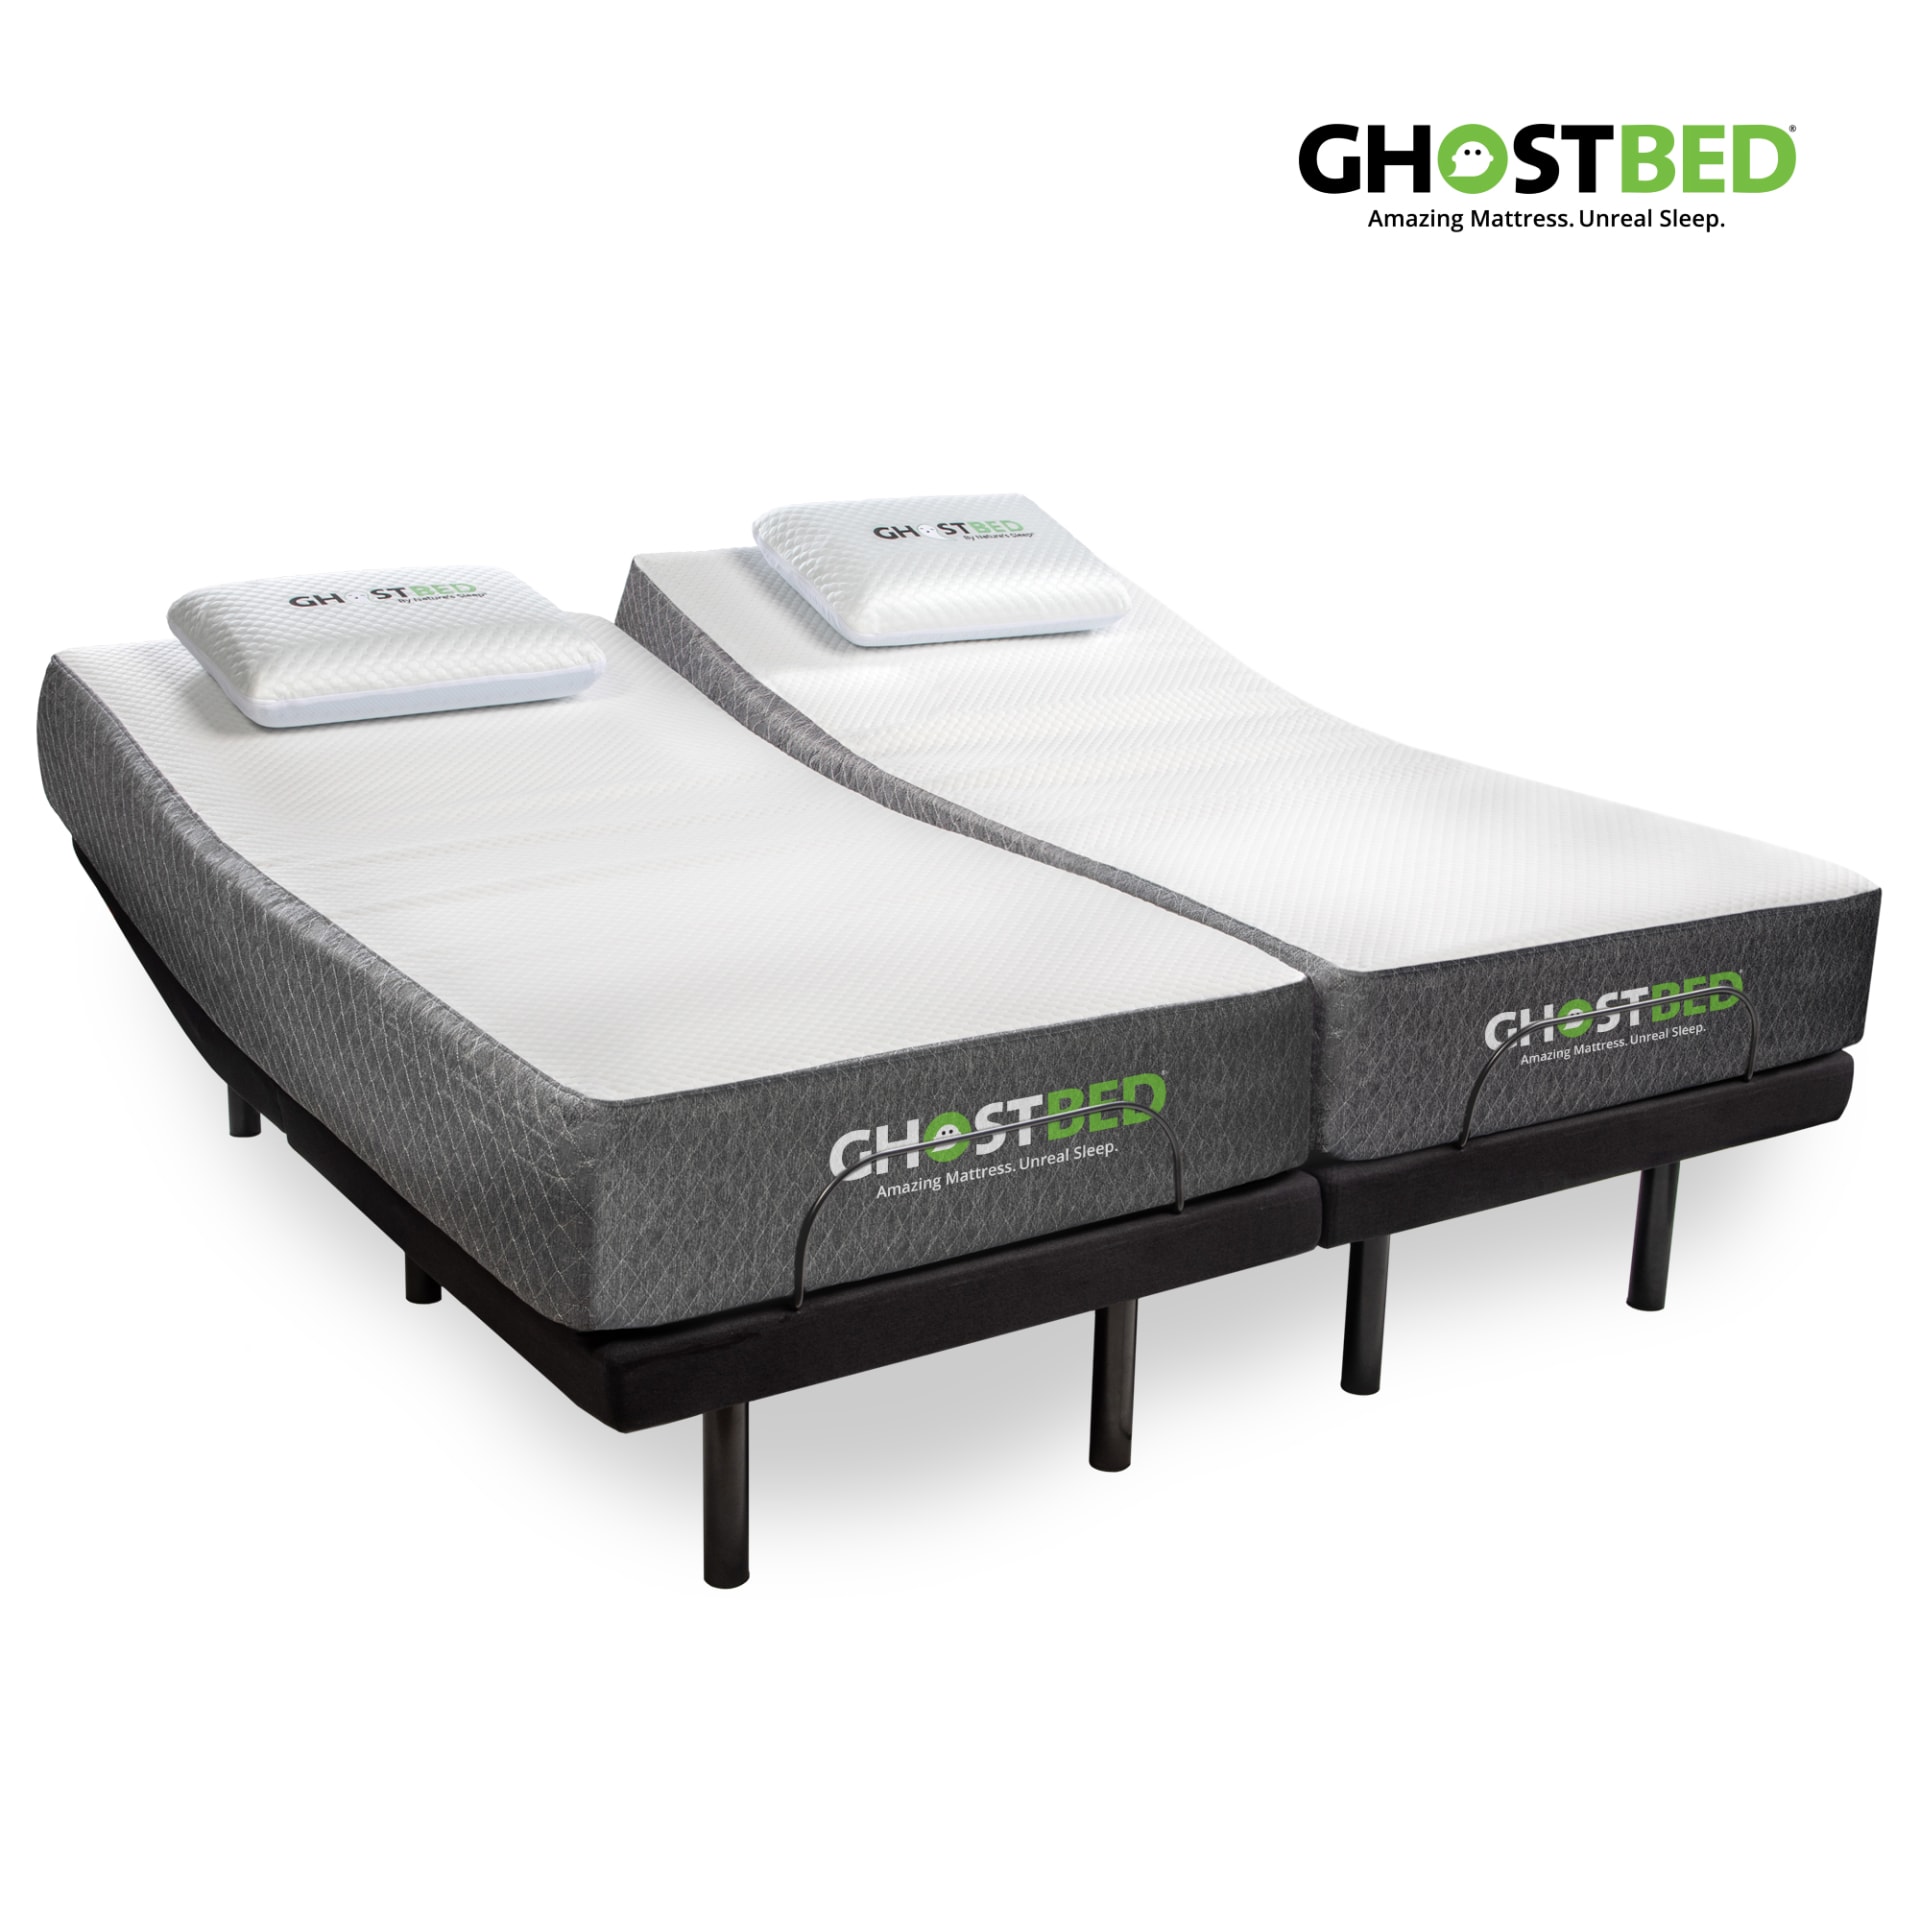 Ghostbed 11 Memory Foam Mattress With, Split King Adjustable Bed Frame Reviews